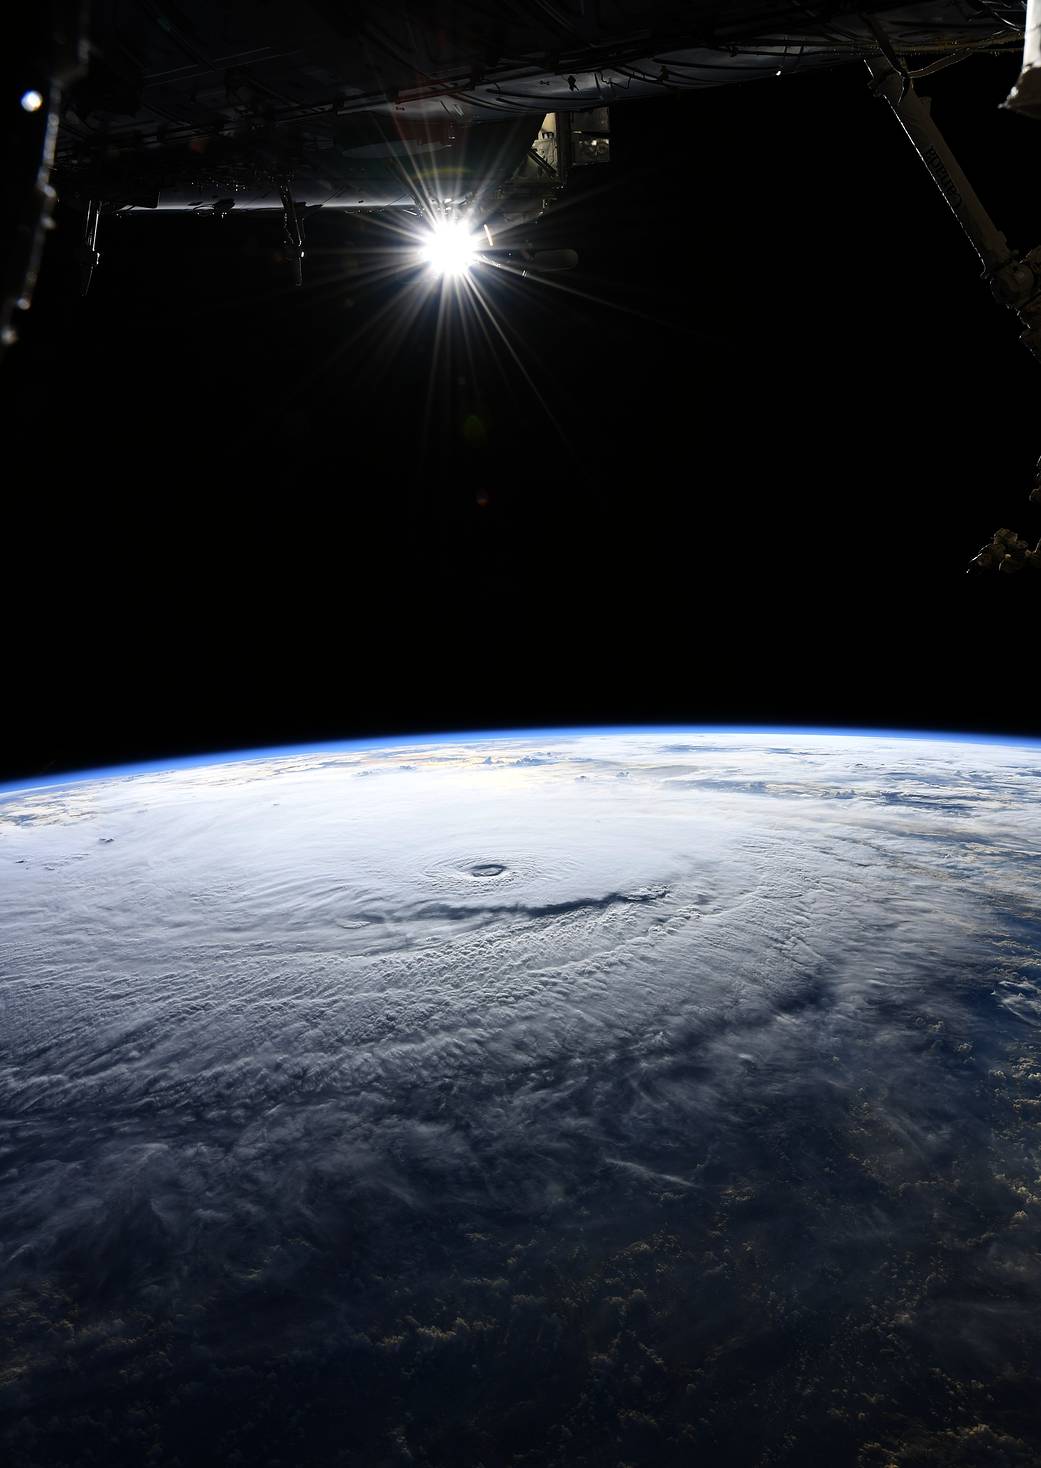 Hurricane viewed from space station